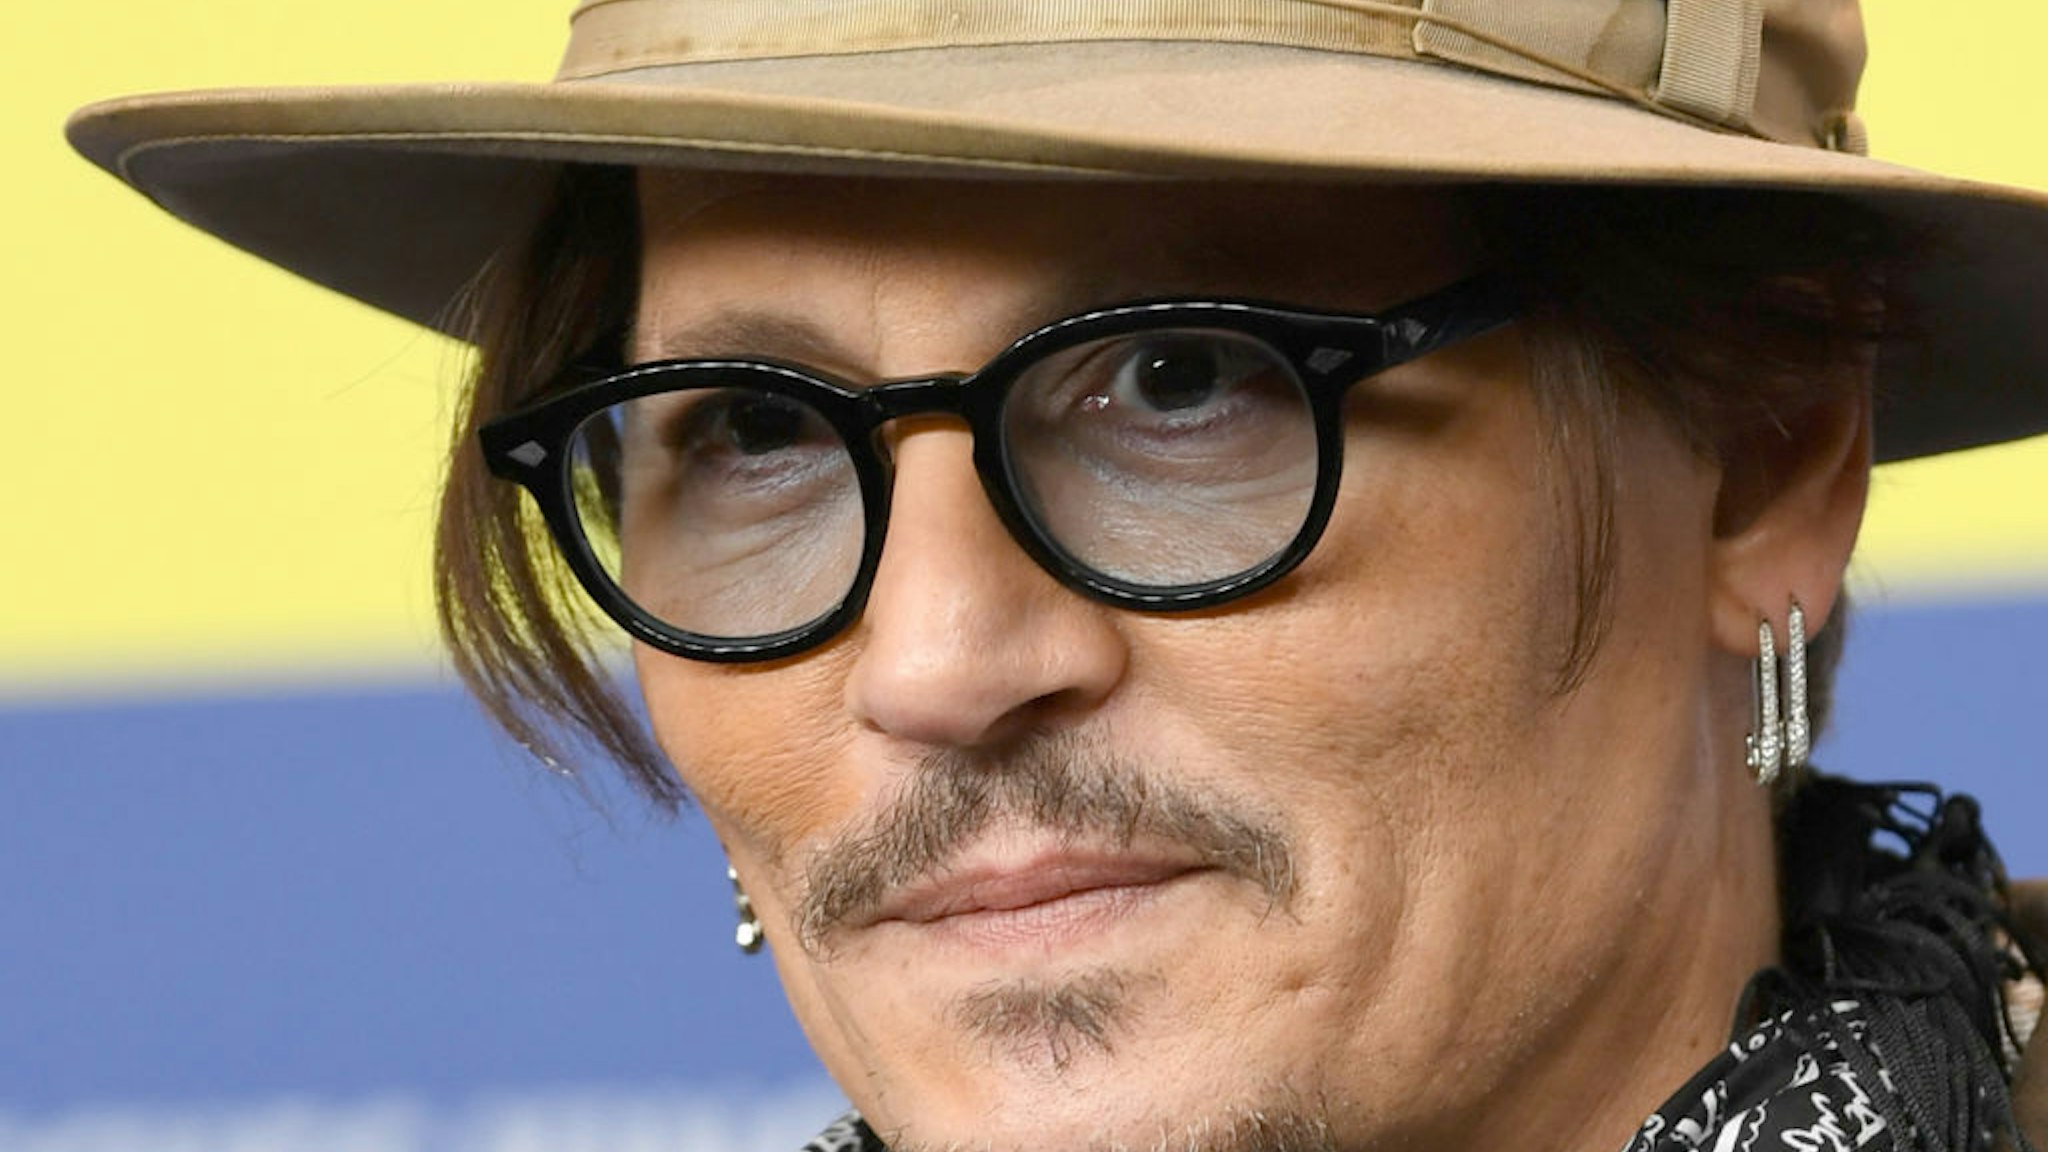 Actor Johnny Depp attends the press conference for Minamata during the 70th Berlin International Film Festival at the Grand Hyatt Berlin.